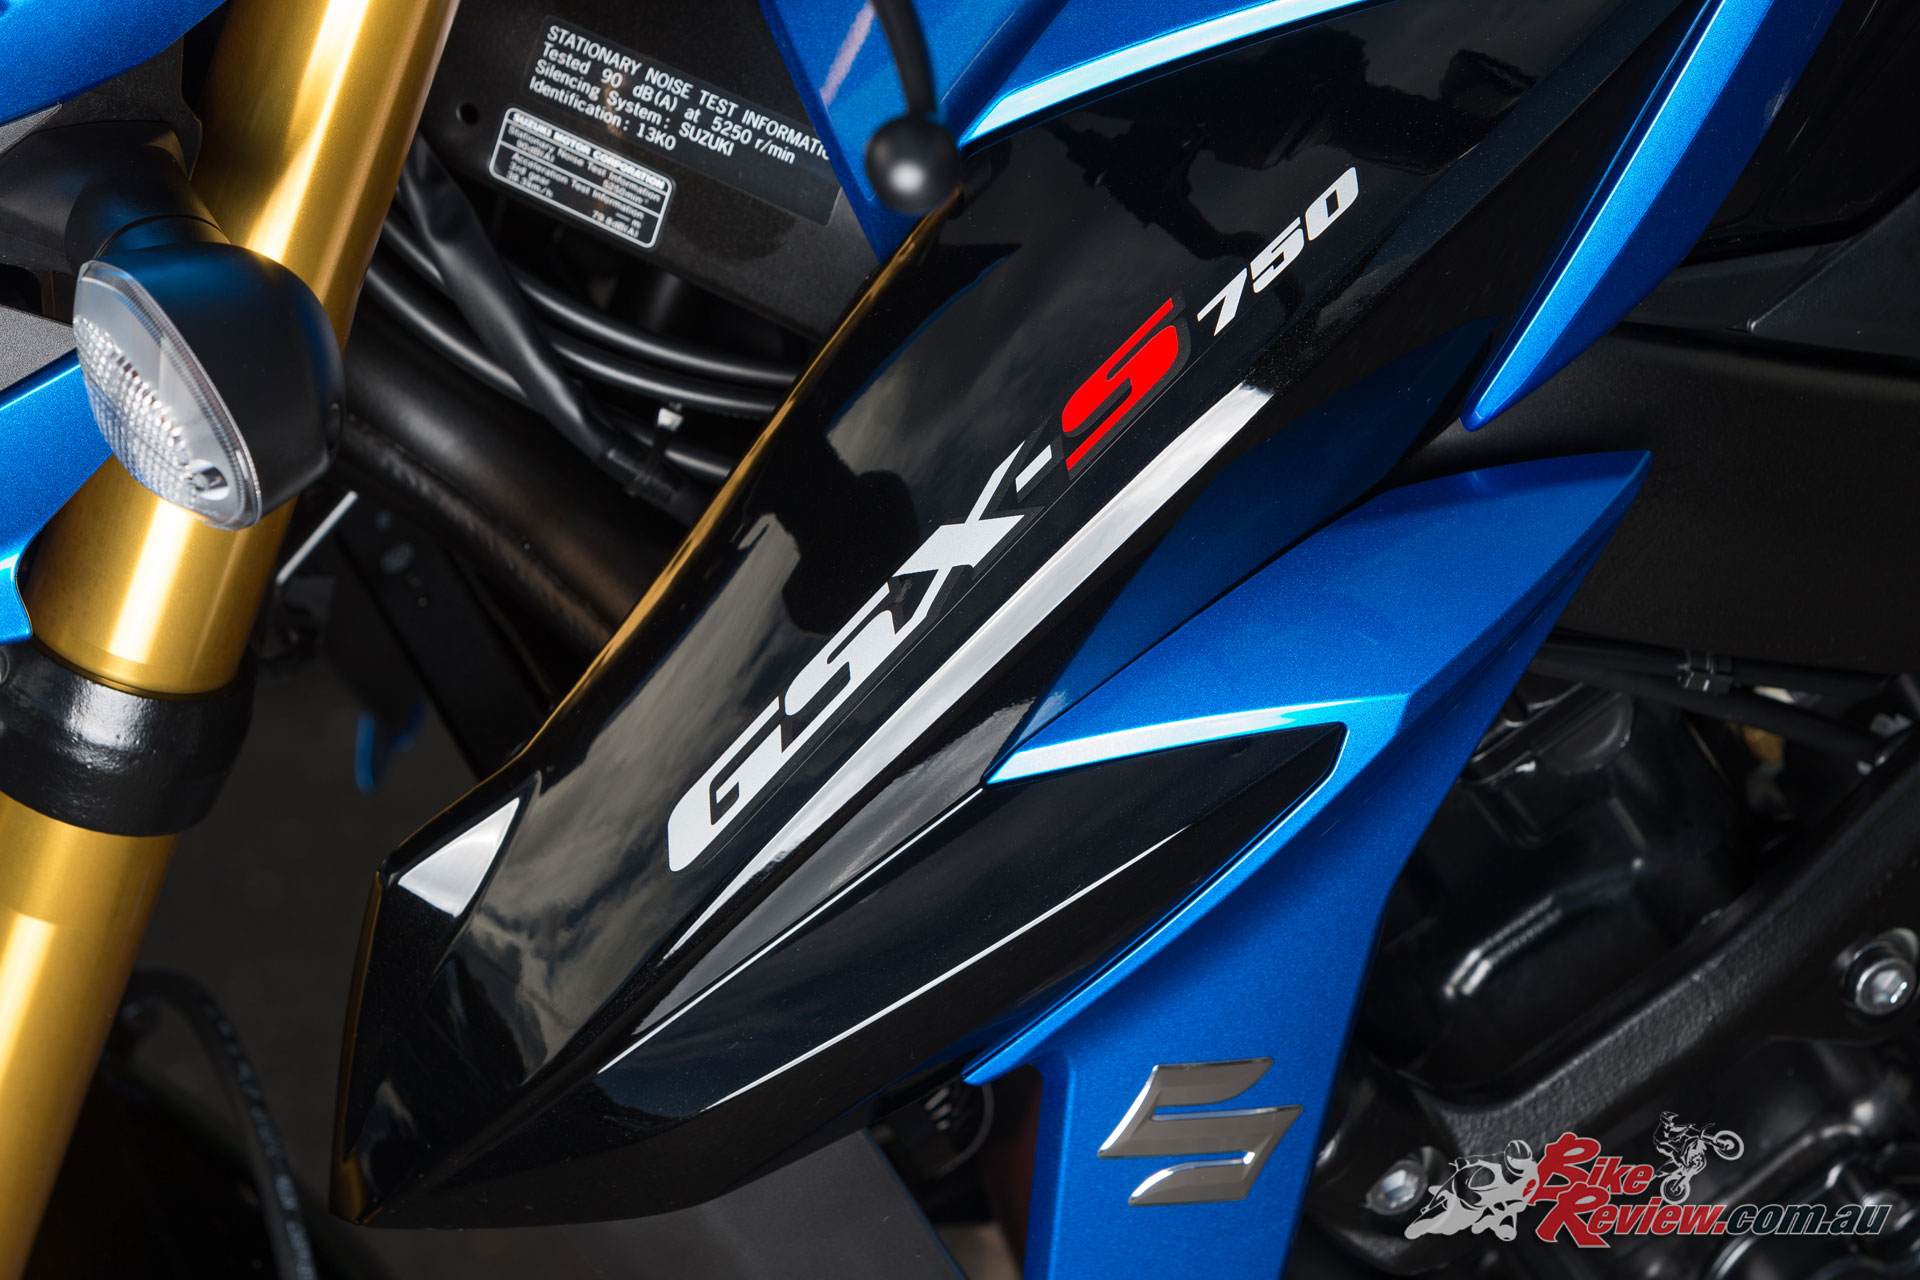 The GSX-S750 takes the K5 GSX-R750 based powerplant and offers a new mid-weight nakedbike